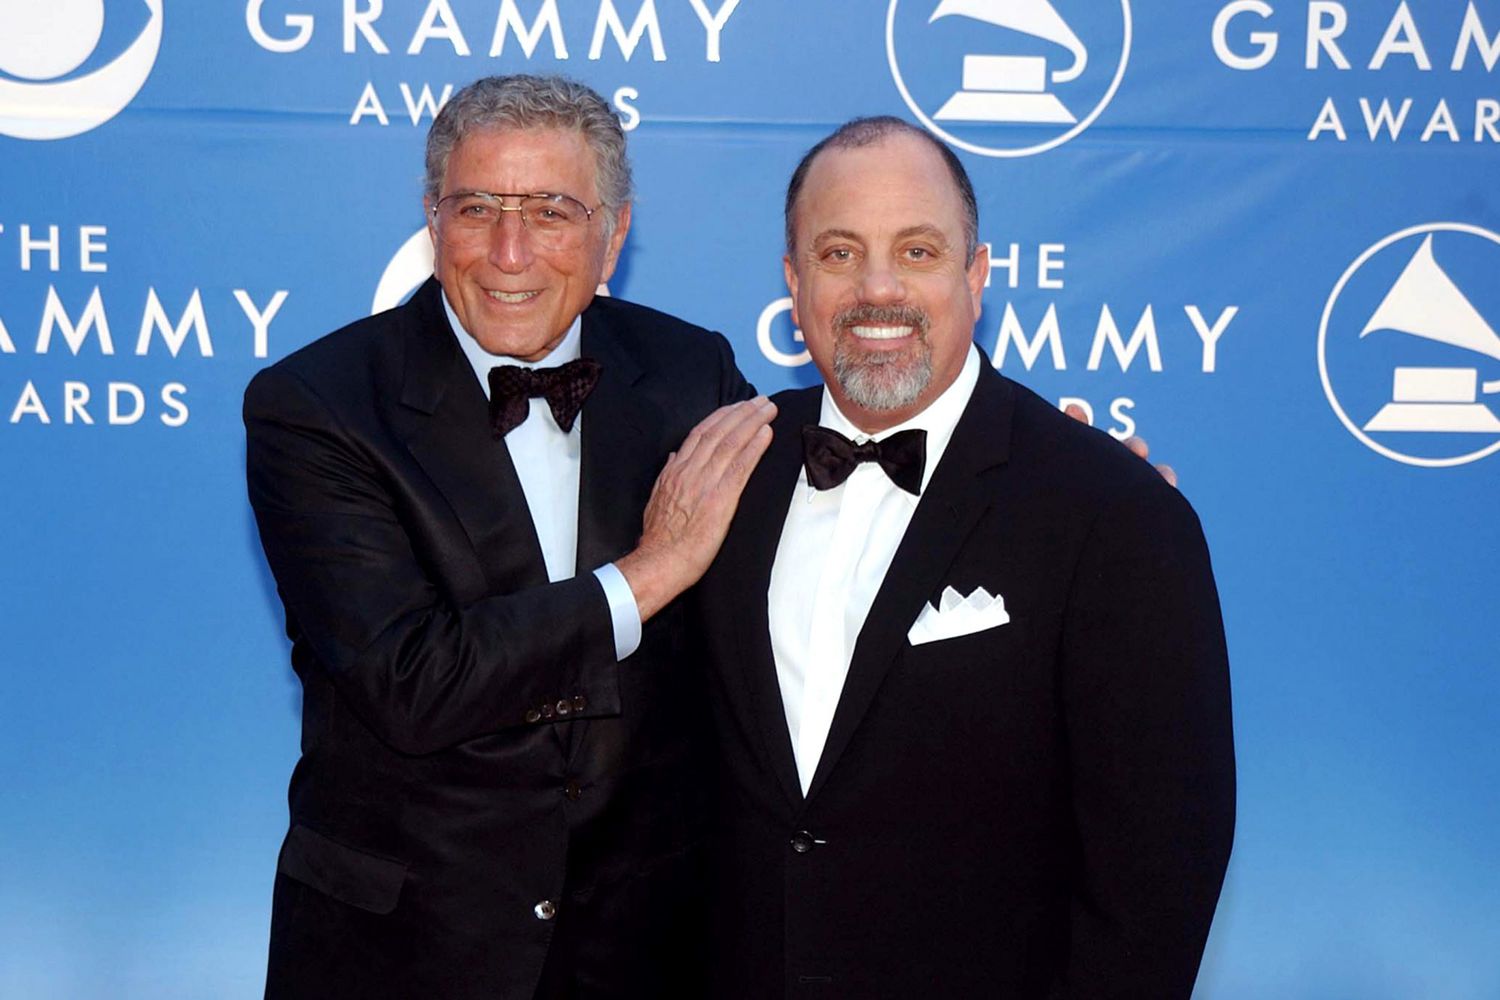 Best Pop Collaboration with Vocals Nominees Tony Bennett and Billy Joel (New York State of Mind)